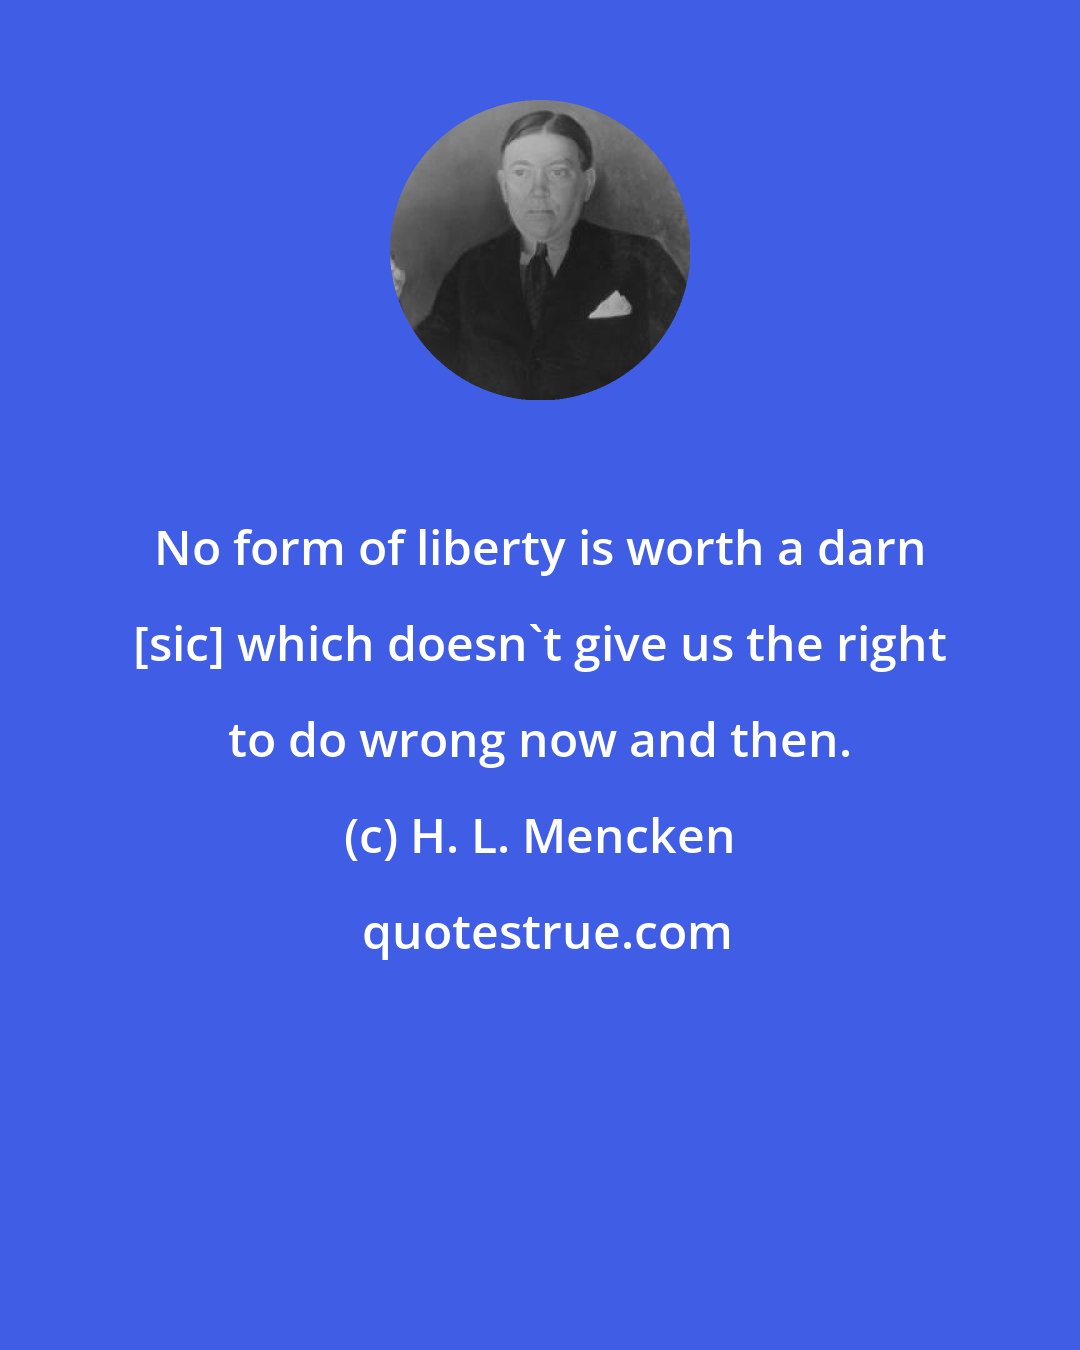 H. L. Mencken: No form of liberty is worth a darn [sic] which doesn't give us the right to do wrong now and then.